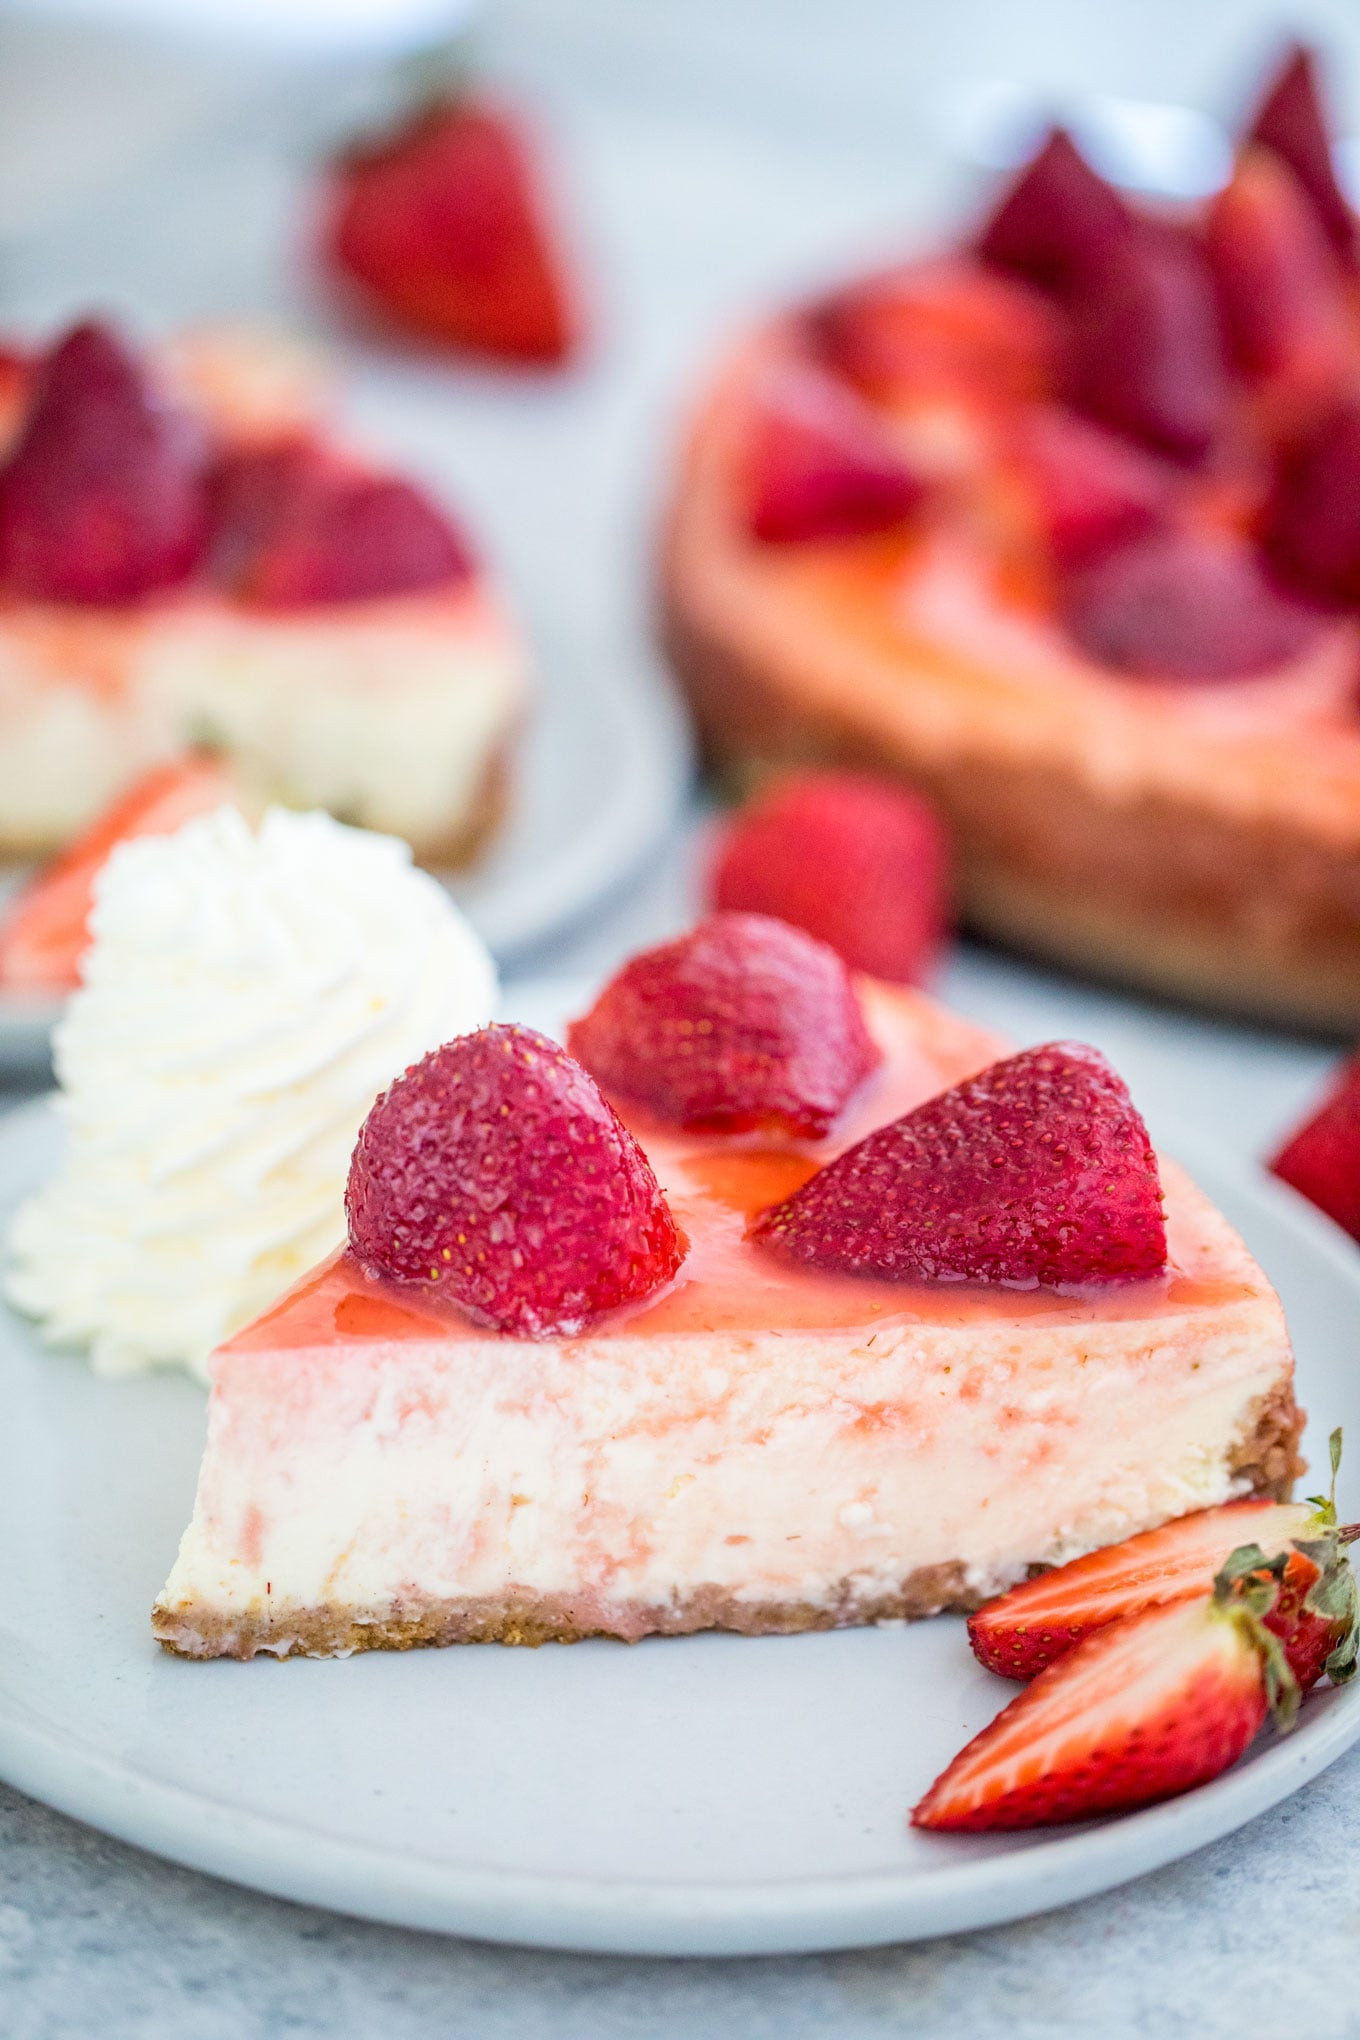 Strawberry Cheese Cake Best Of Strawberry Cheesecake Recipe Sweet and Savory Meals